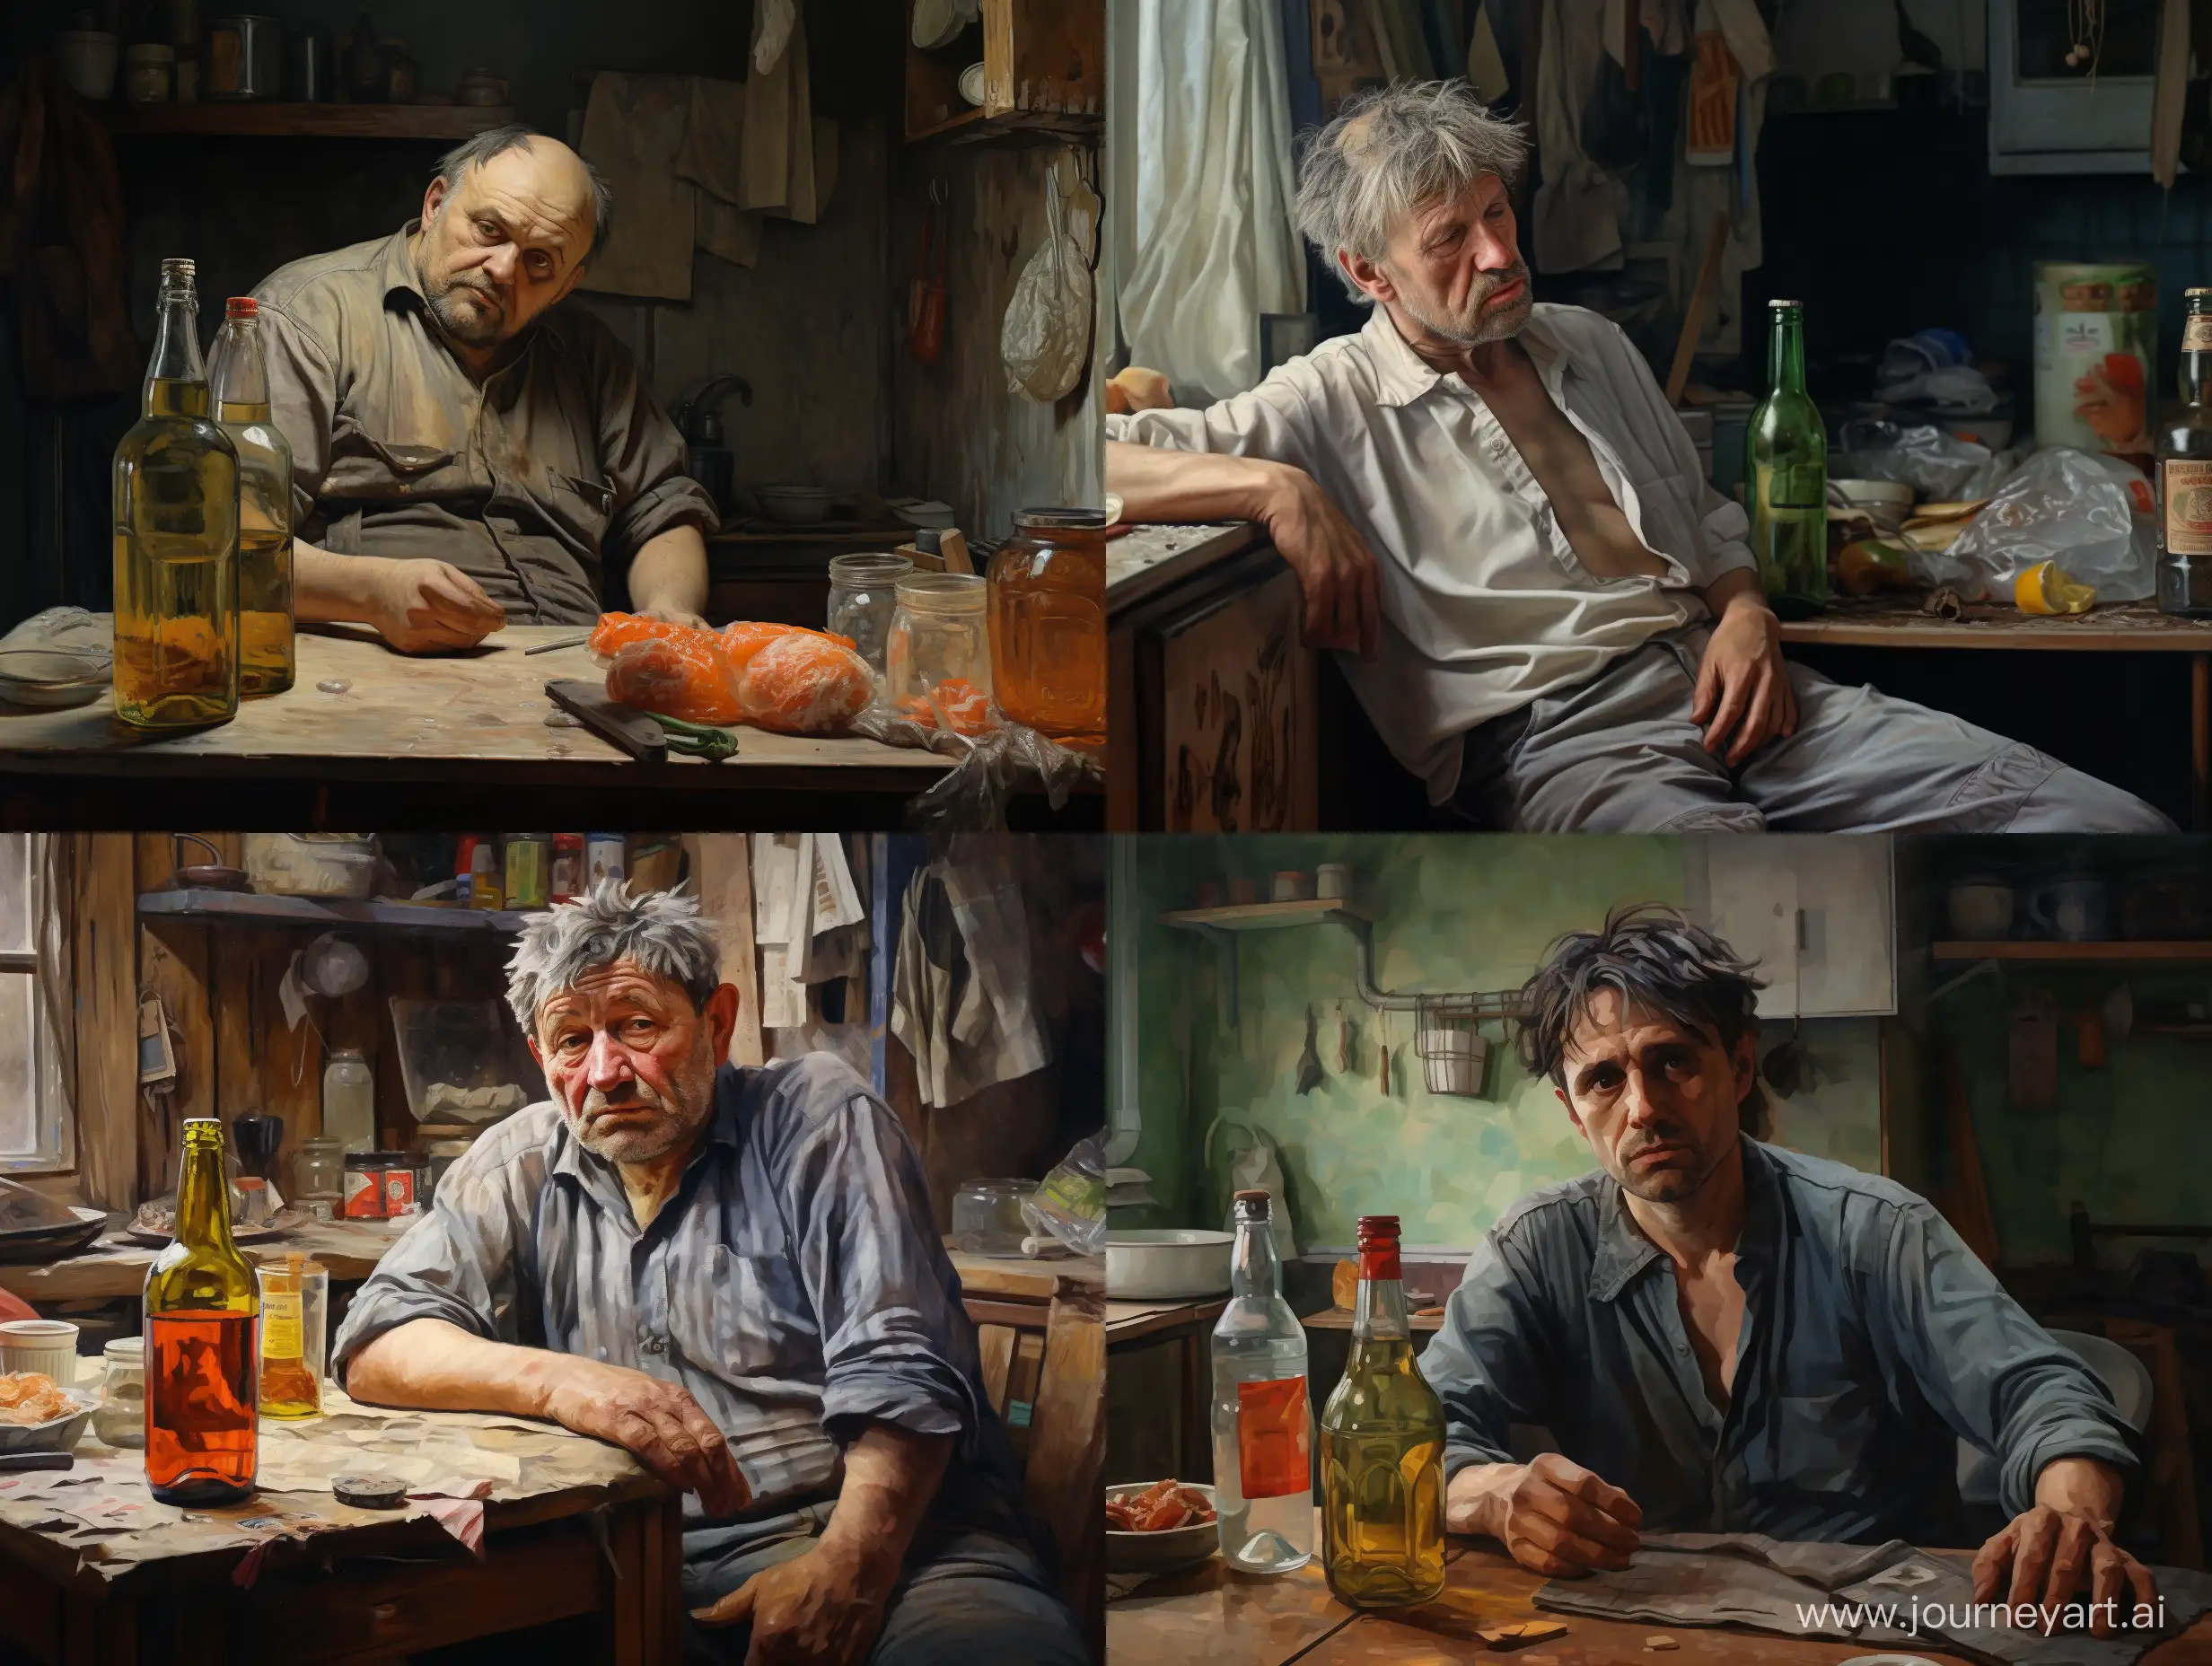 MiddleAged-Russian-Man-in-Distressed-Setting-Drinking-Alcohol